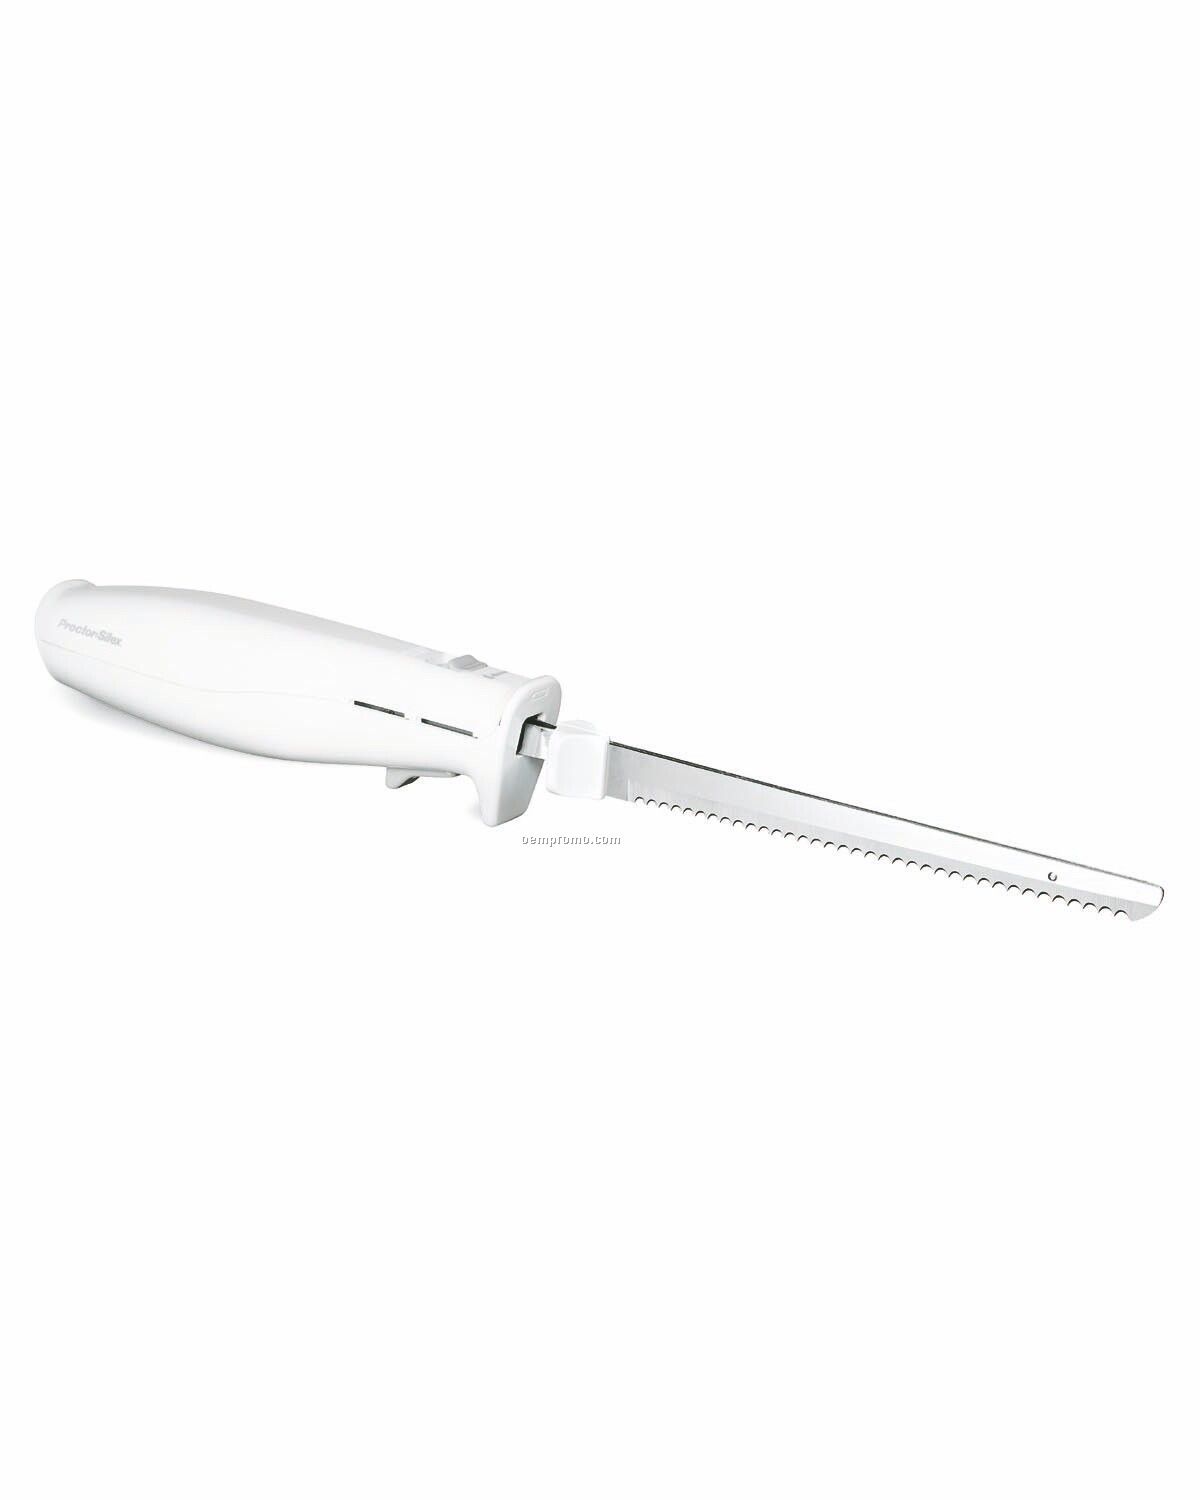 Proctor Silex Ps - Electric Knife